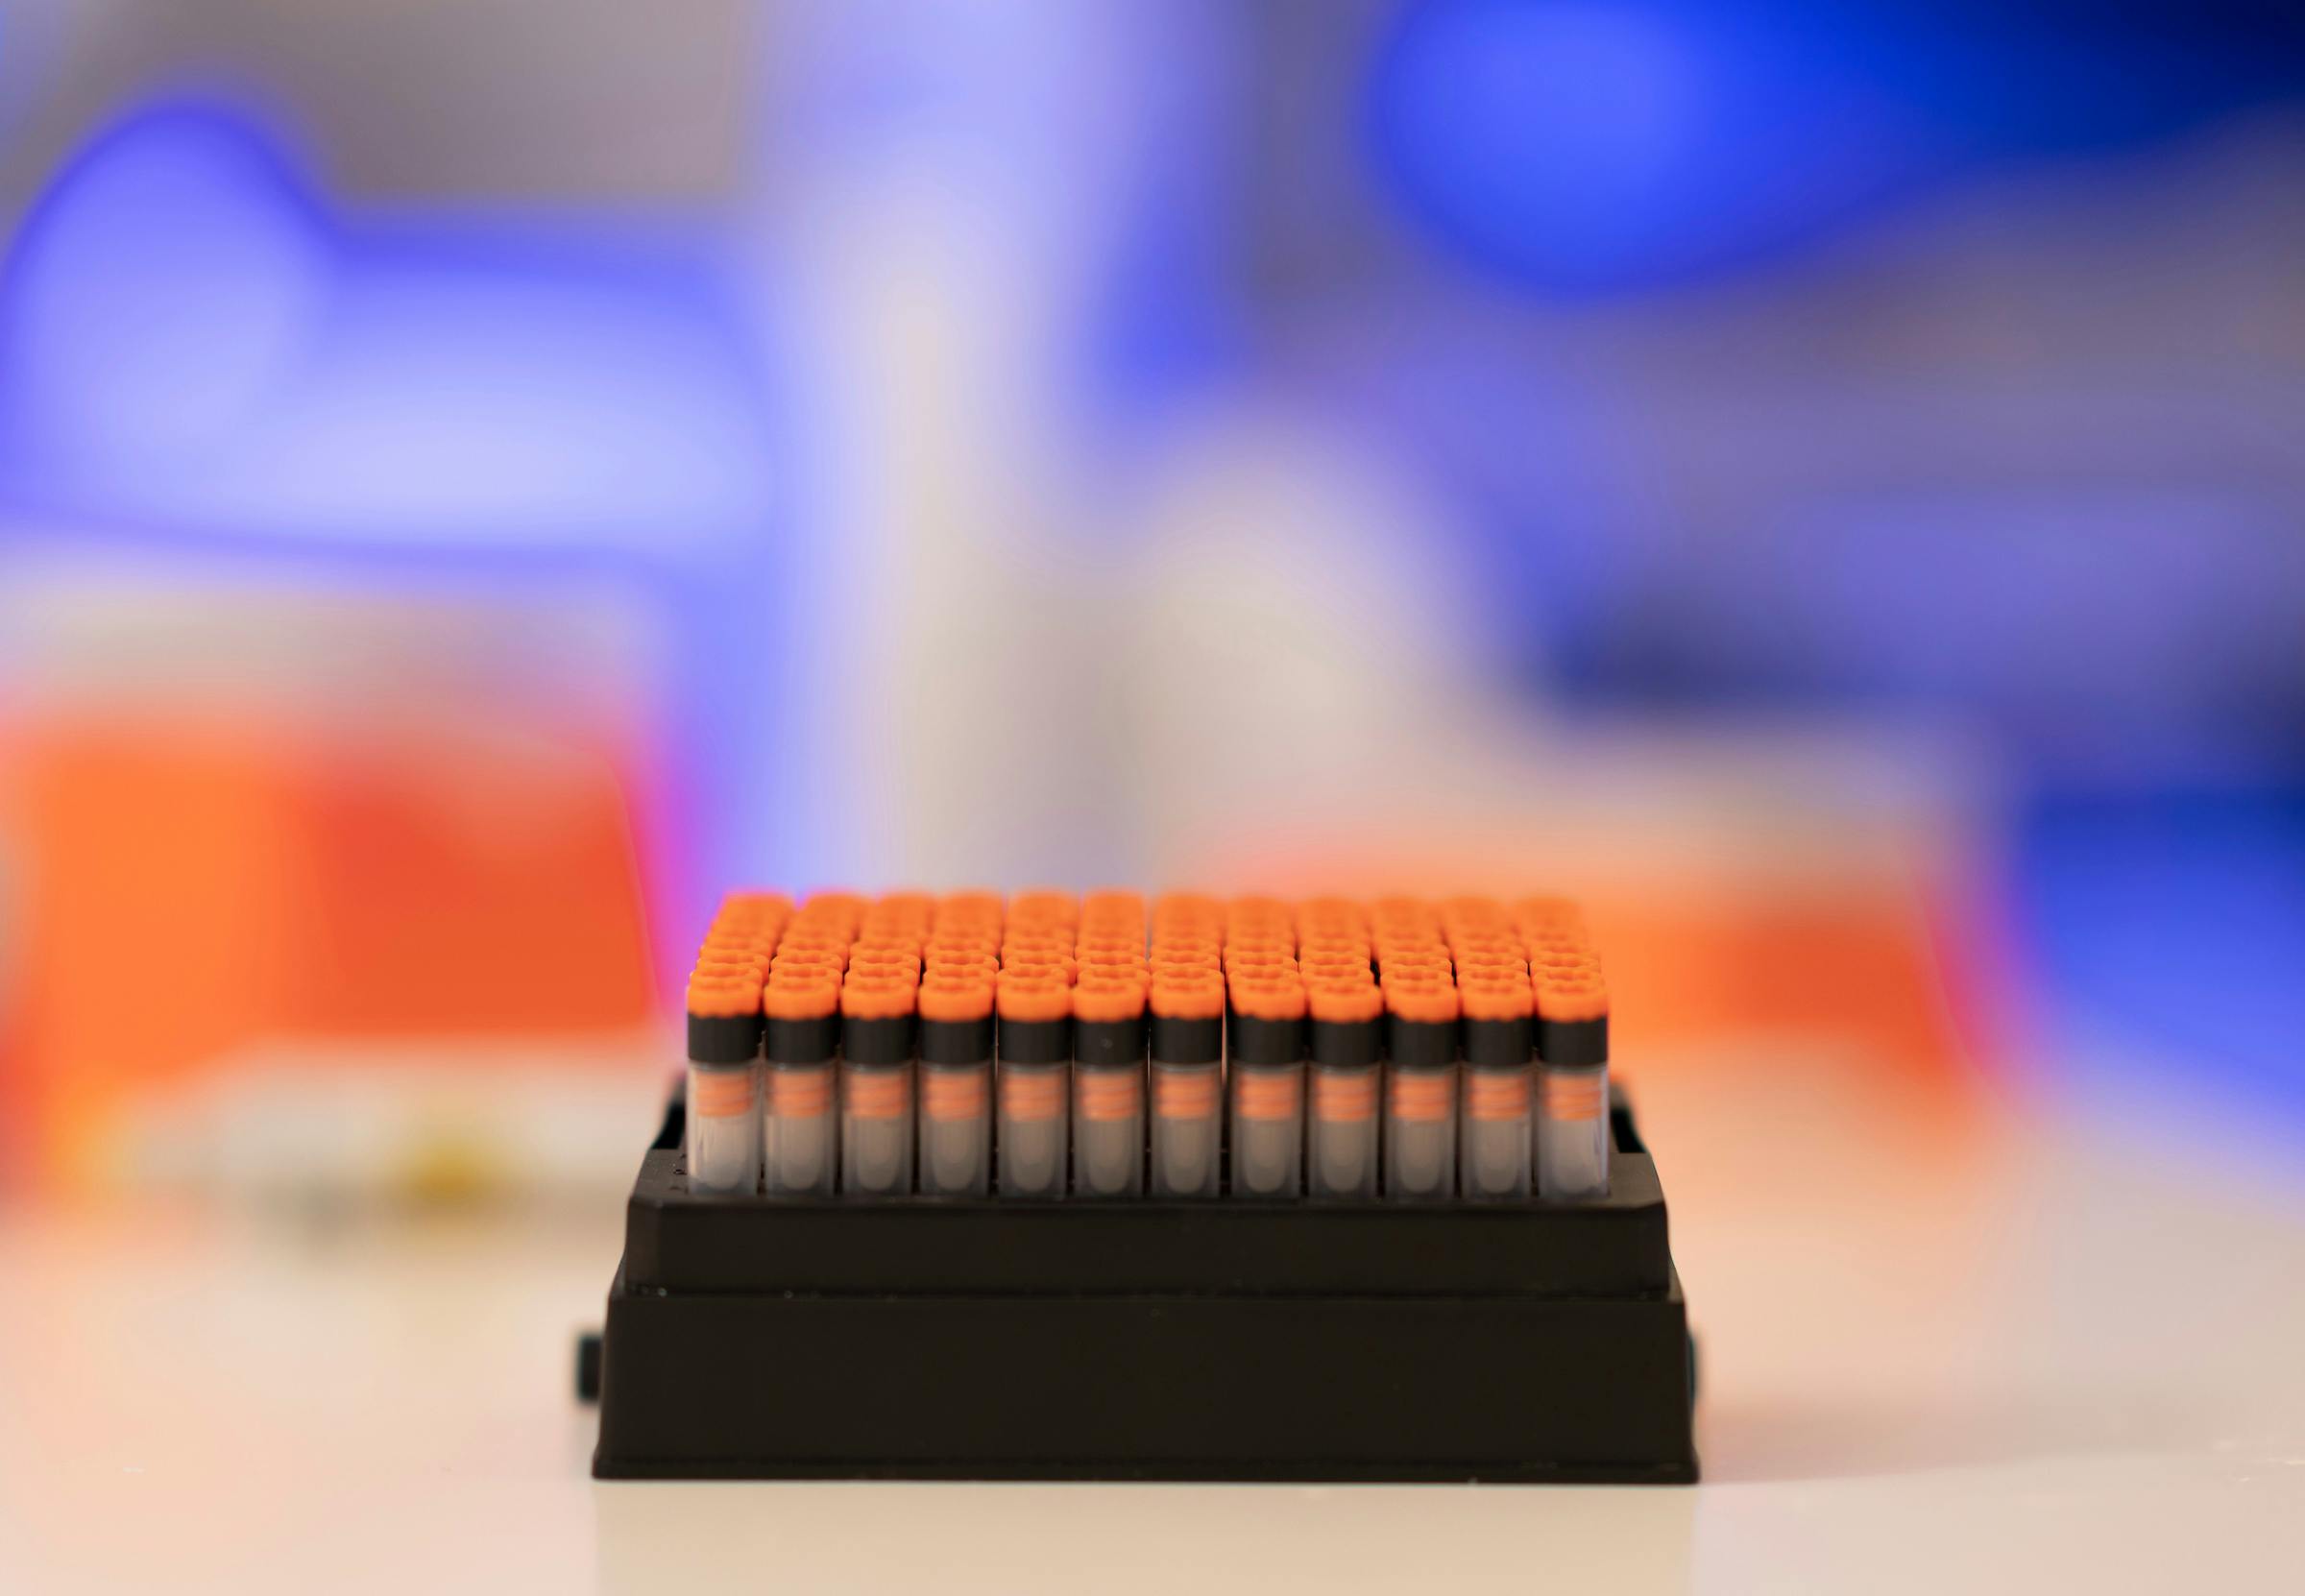 Black tray filled with plastic vials with orange lids in front of a blurred laboratory background